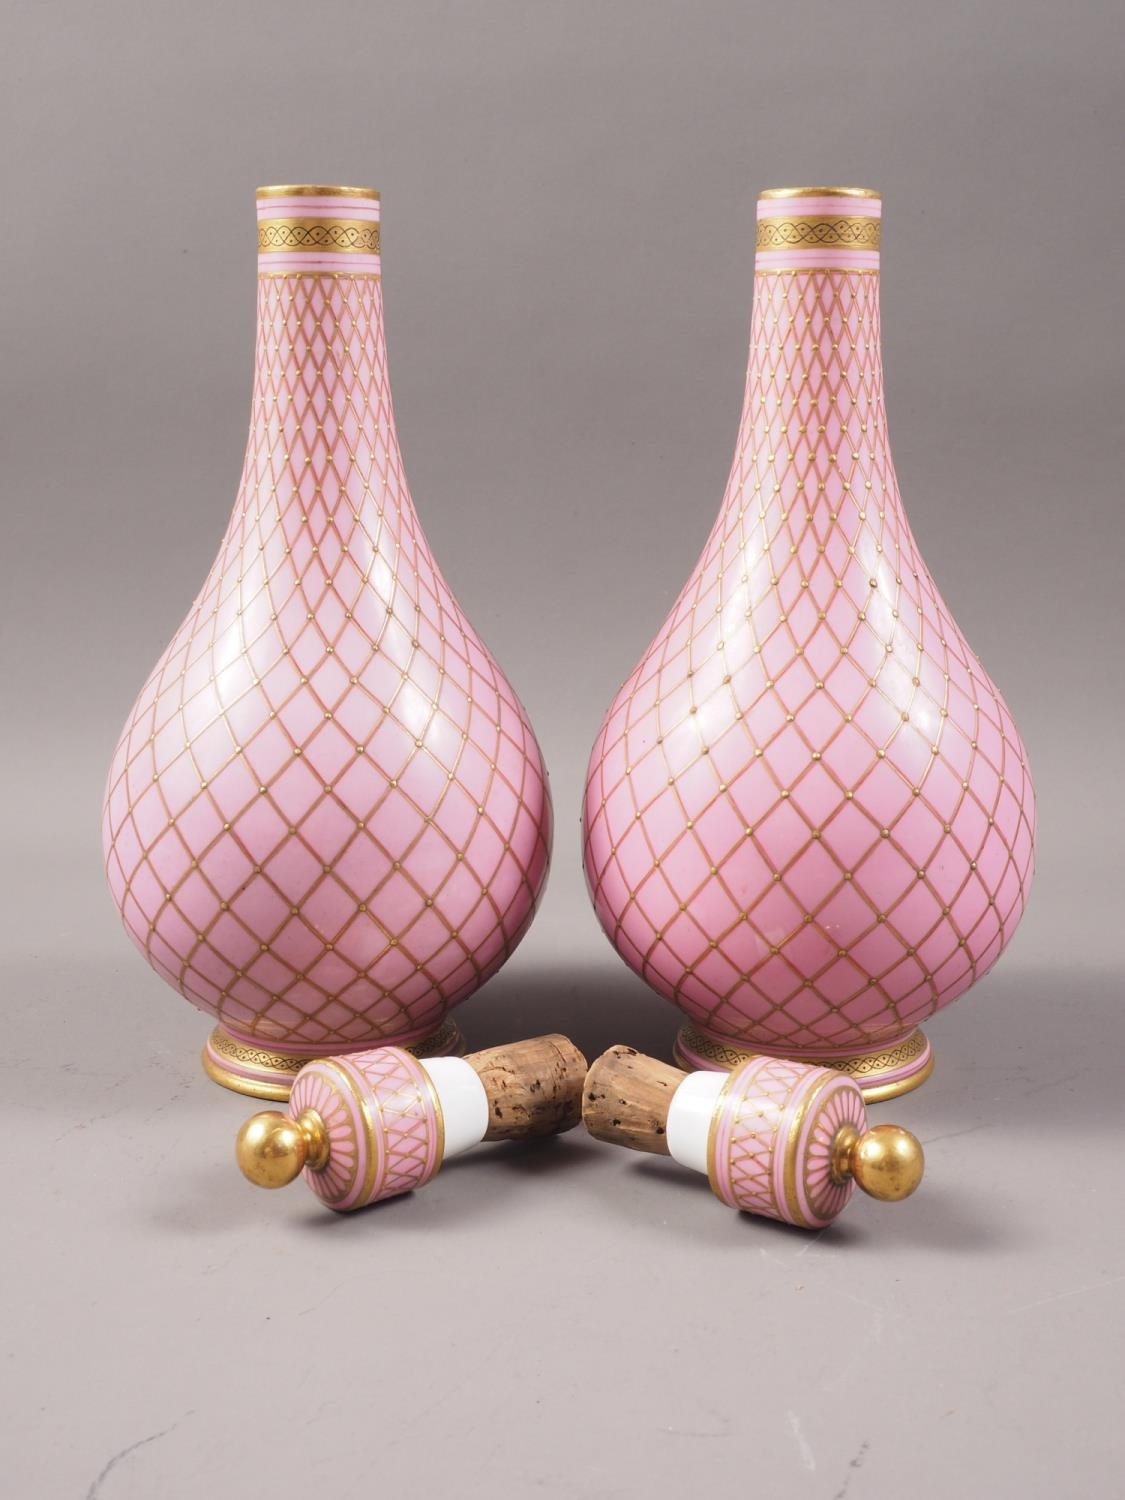 A pair of Sevres style porcelain bottle vases and covers with all-over lattice decoration on a - Image 3 of 3